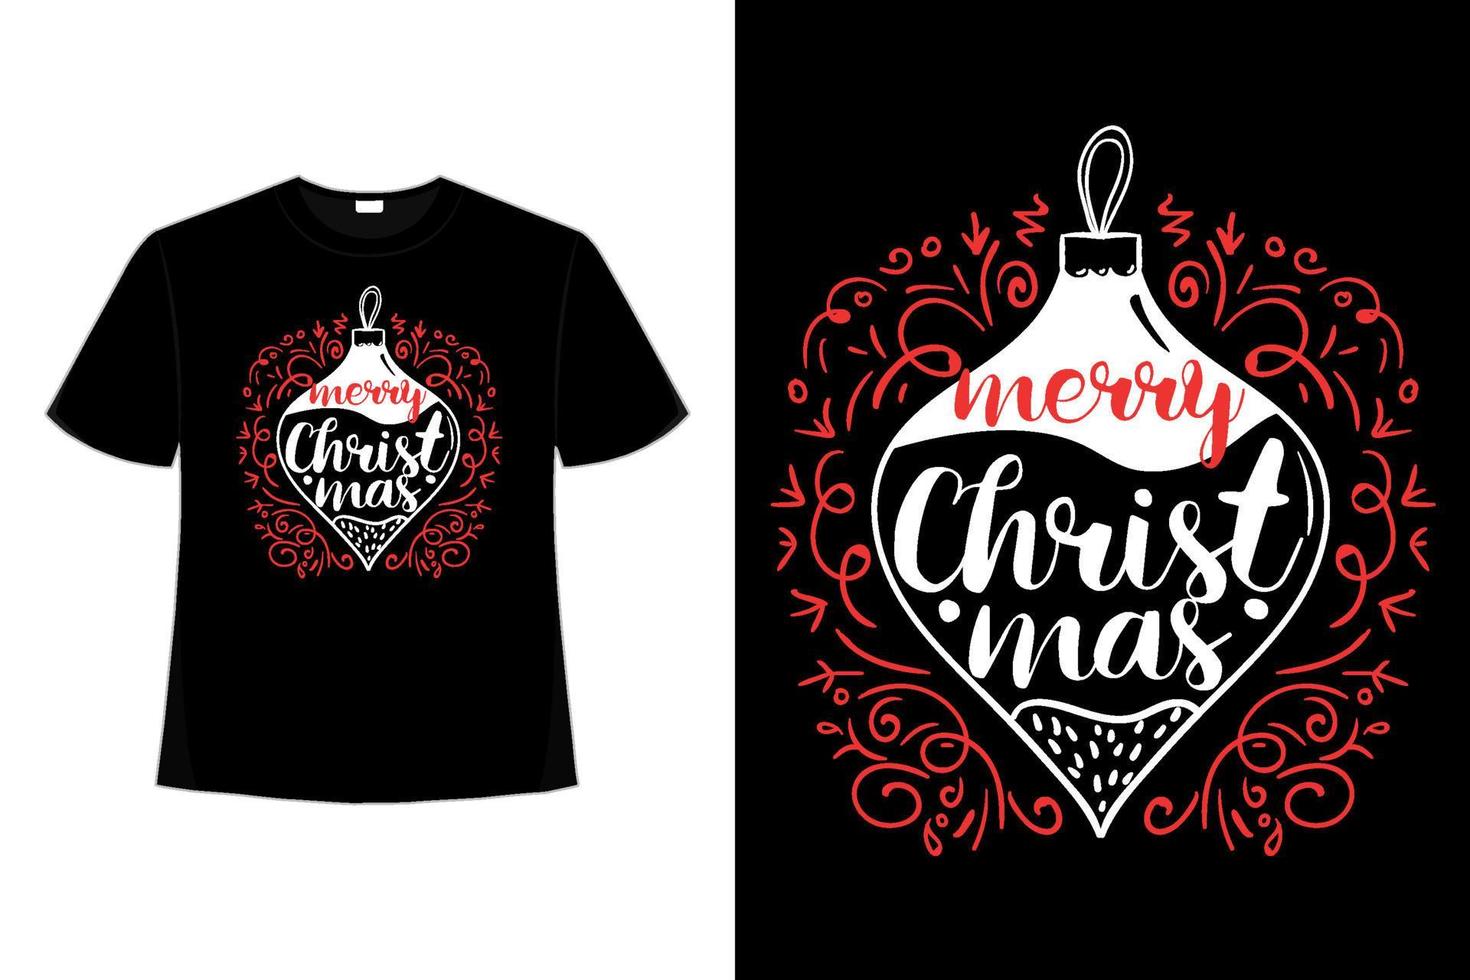 Christmas T-shirt Design, Vintages Tshirt, Vector, Christmas Tree, Happy Christmas Day Gift Christmas Typography T-shirt Design Gift Tshirt. Calligraphy, Isolated Vector Illustration